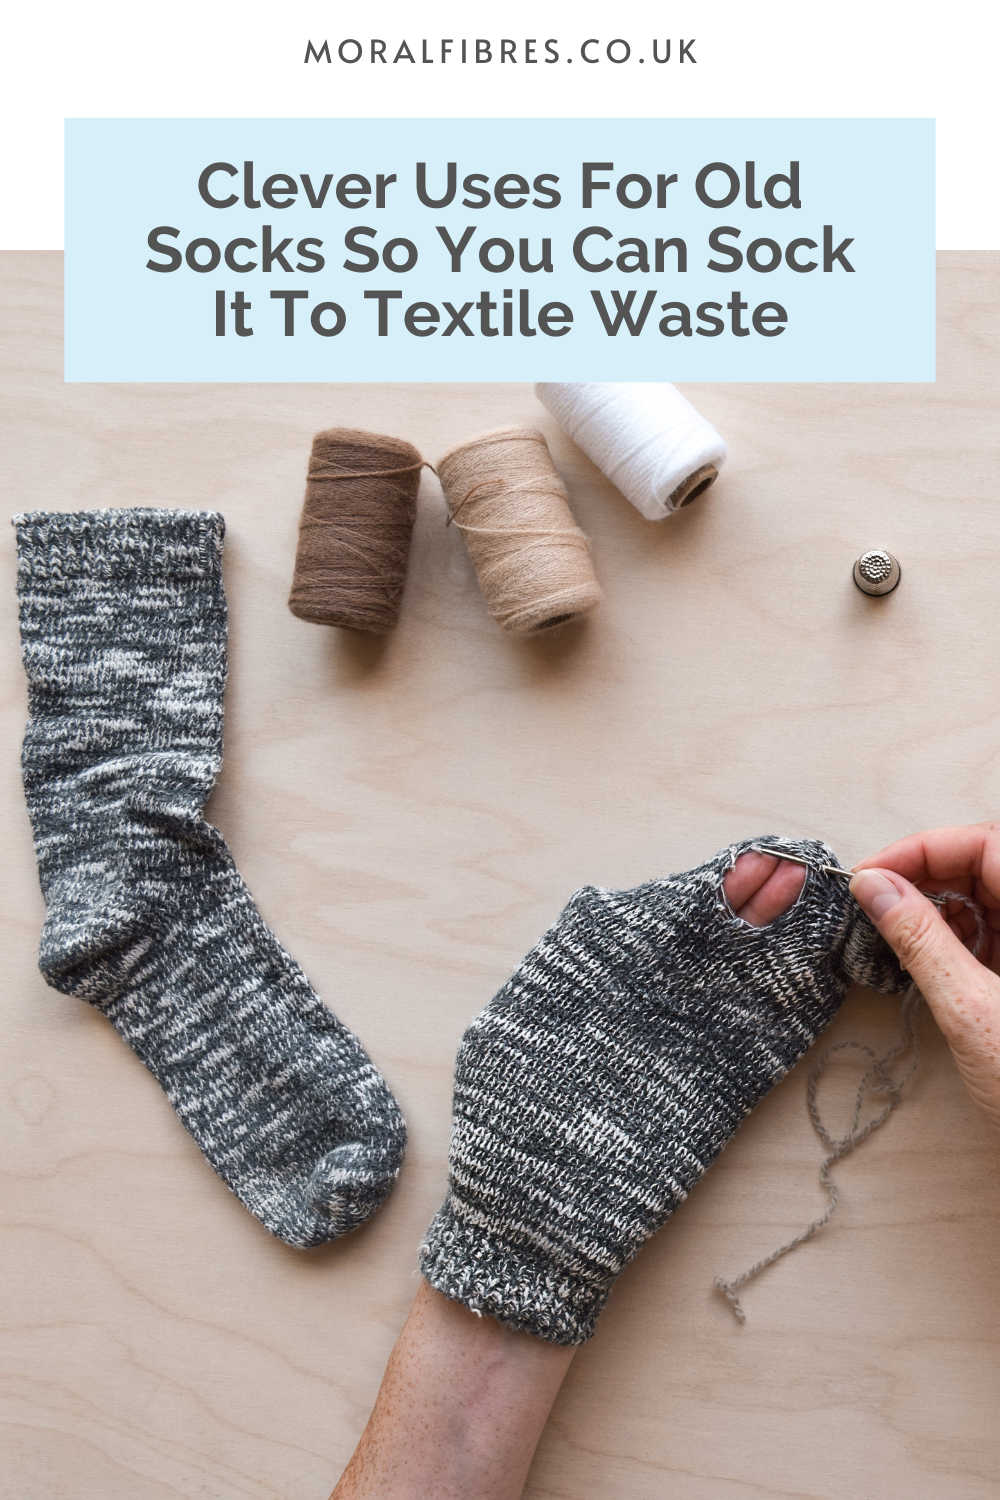 20 Clever Uses For Old Socks So You Can Sock It To Textile Waste